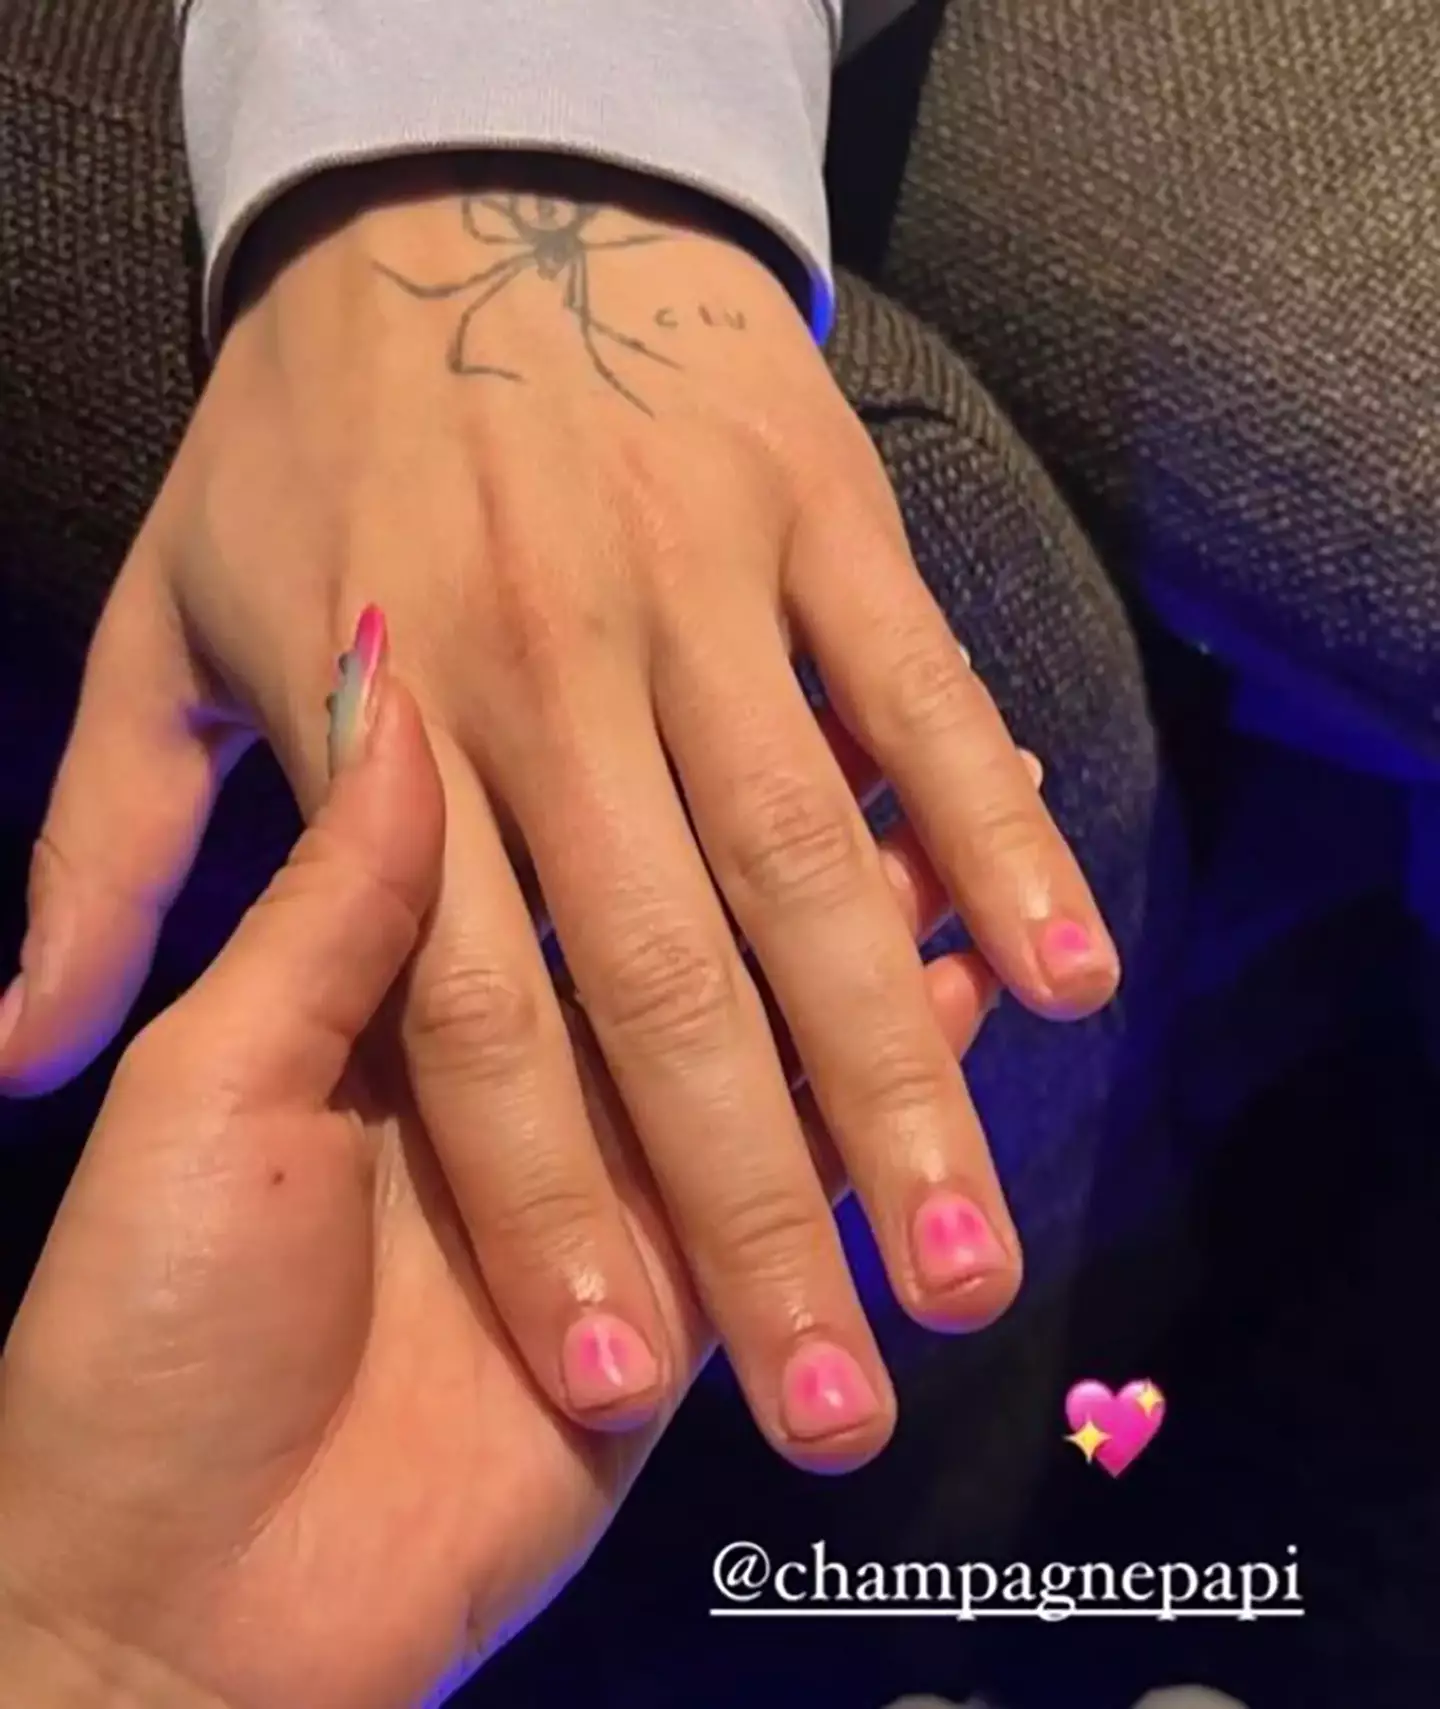 Drake had already shared this picture of his fresh nails.